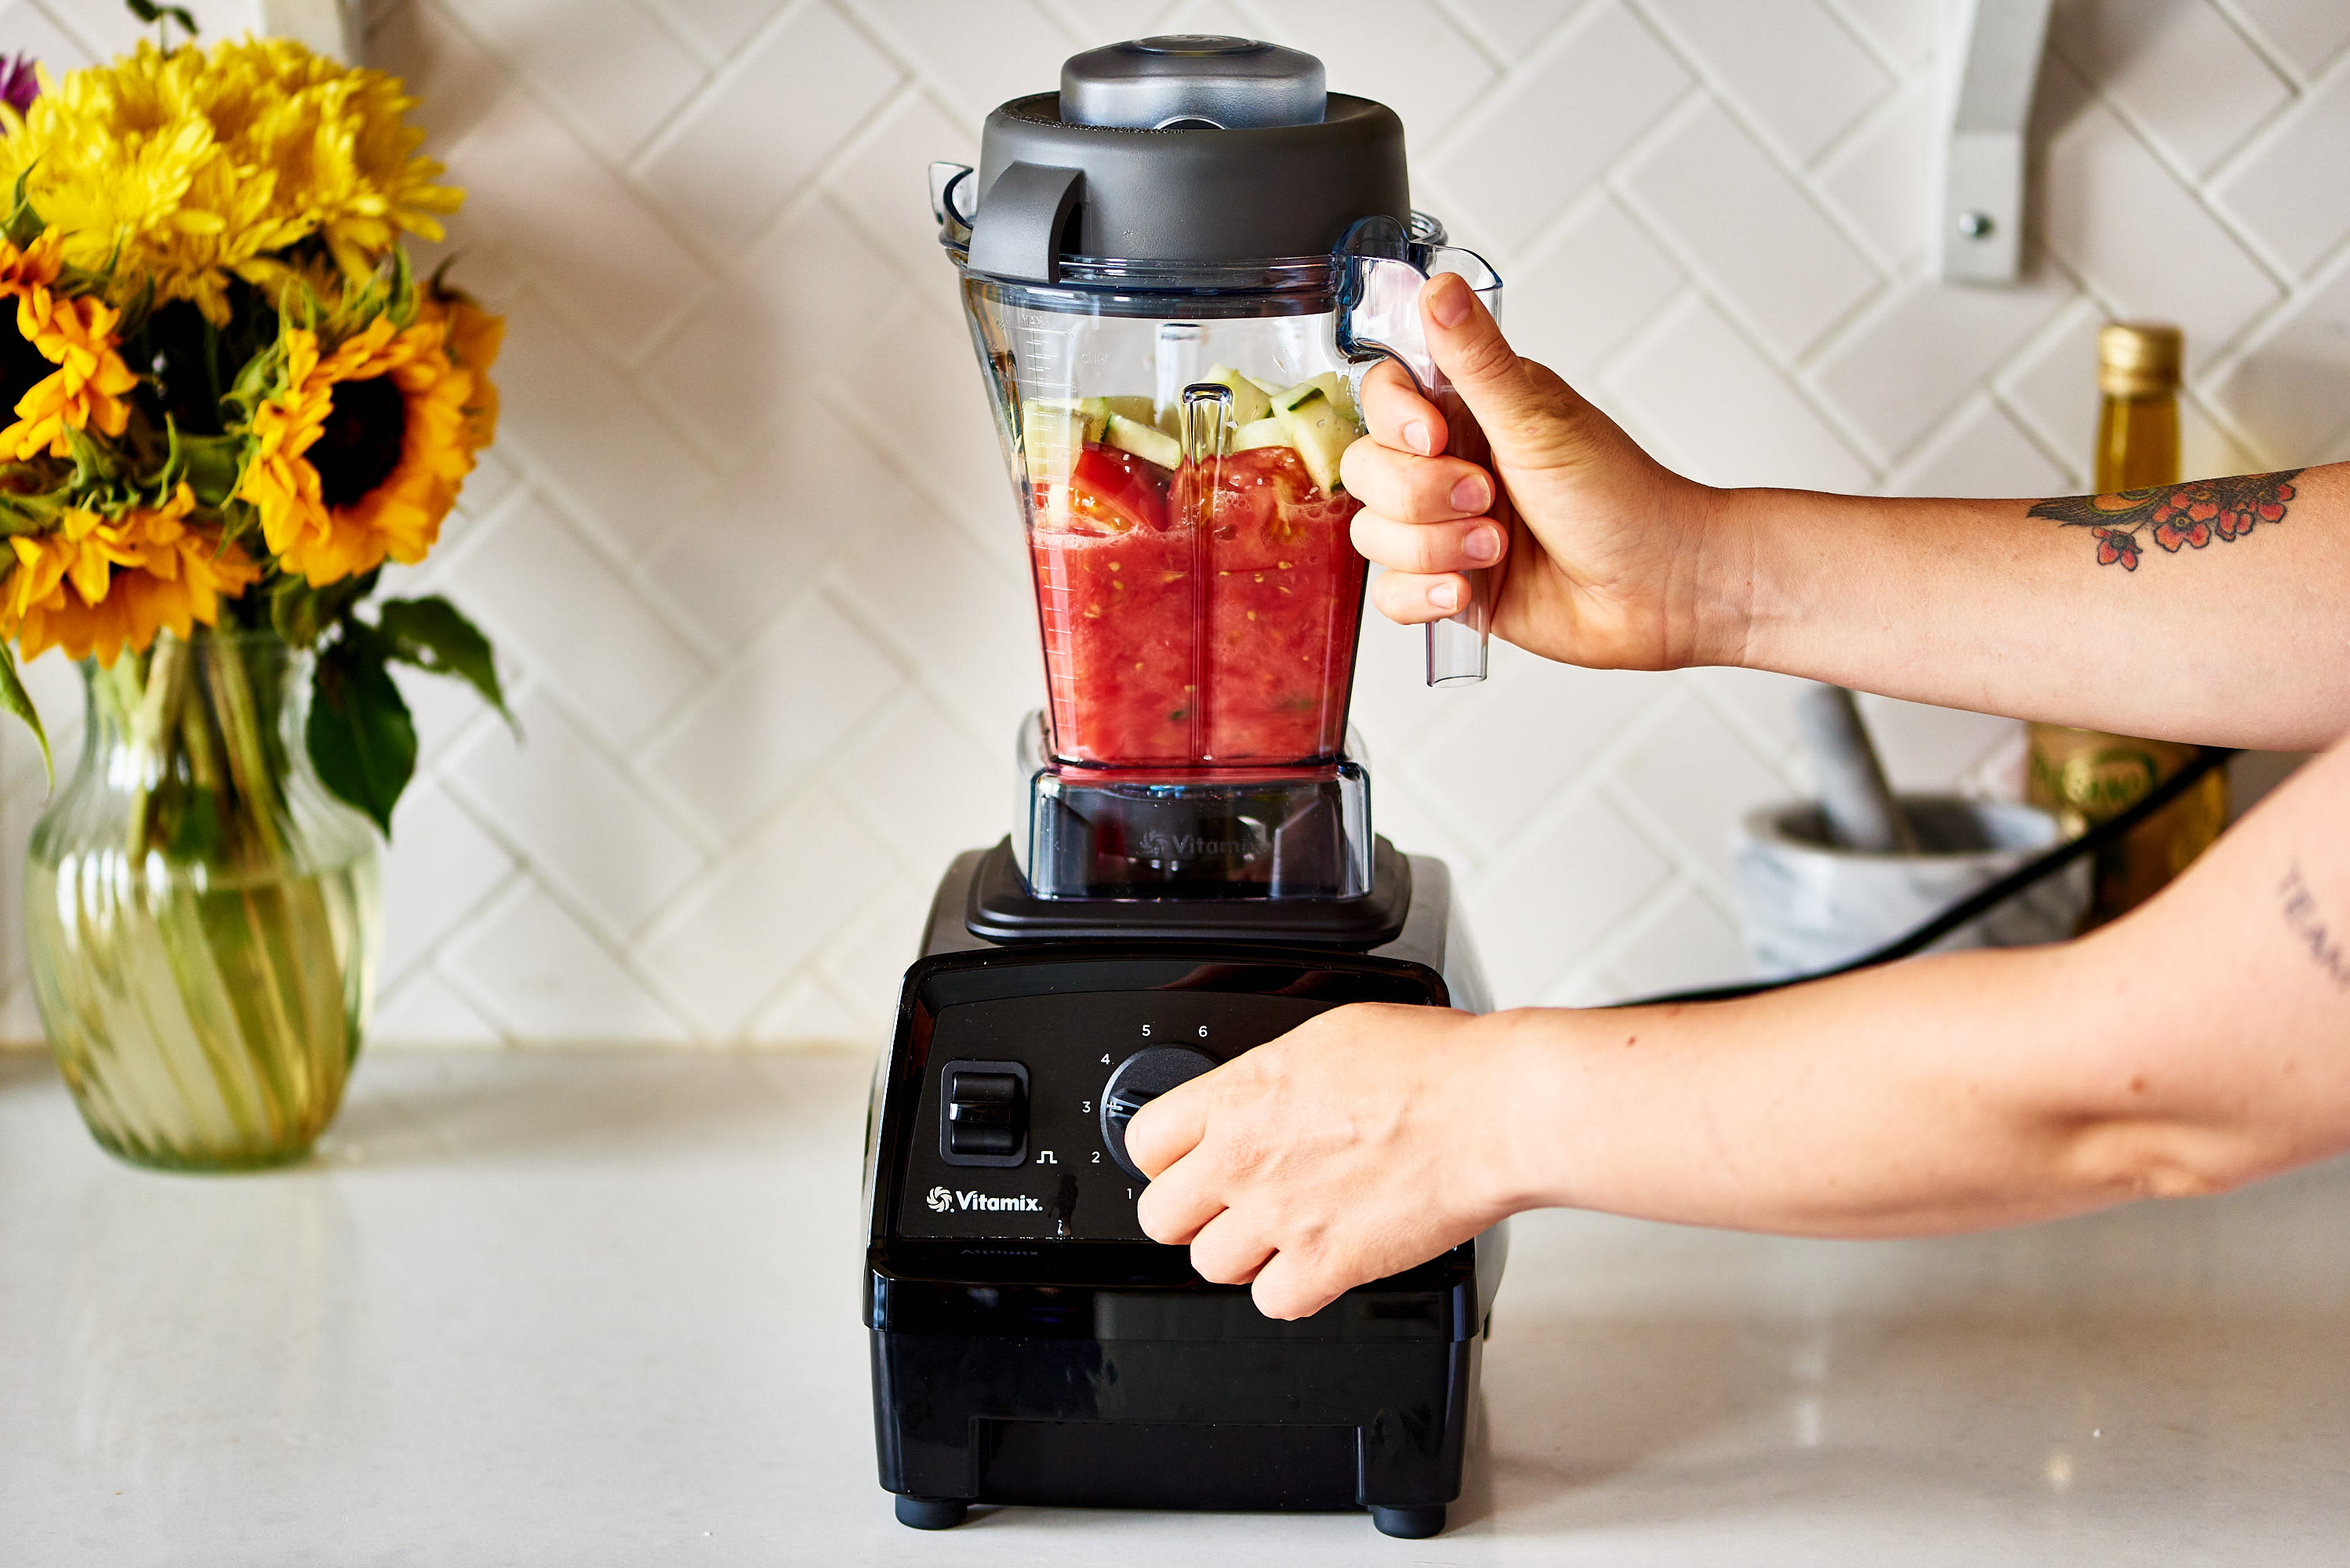 Score a Magic Bullet 7-piece Personal Blender at the price of a